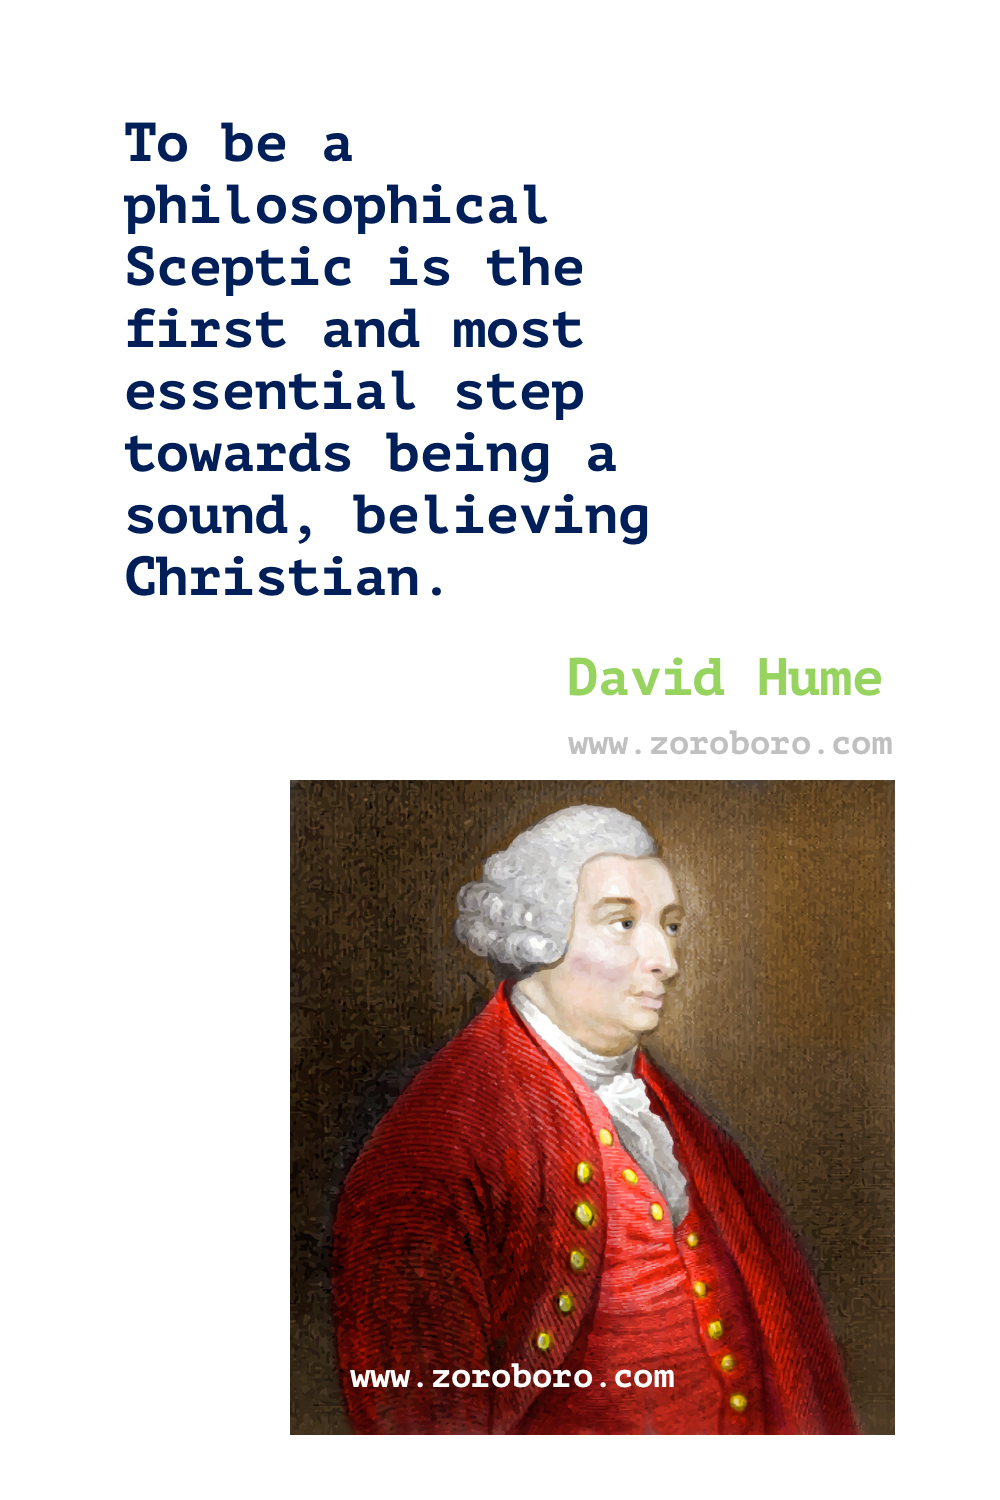 David Hume Quotes. David Hume Philosophy. David Hume Books Quotes. Essays, Moral, Political, Life and Literary. David Hume Quotes    David Hume's Books - A Treatise of Human Nature, An Enquiry Concerning Human Understanding, Dialogues Concerning Natural Religion, An Enquiry Concerning the Principles of Morals & The History of England (Hume) .